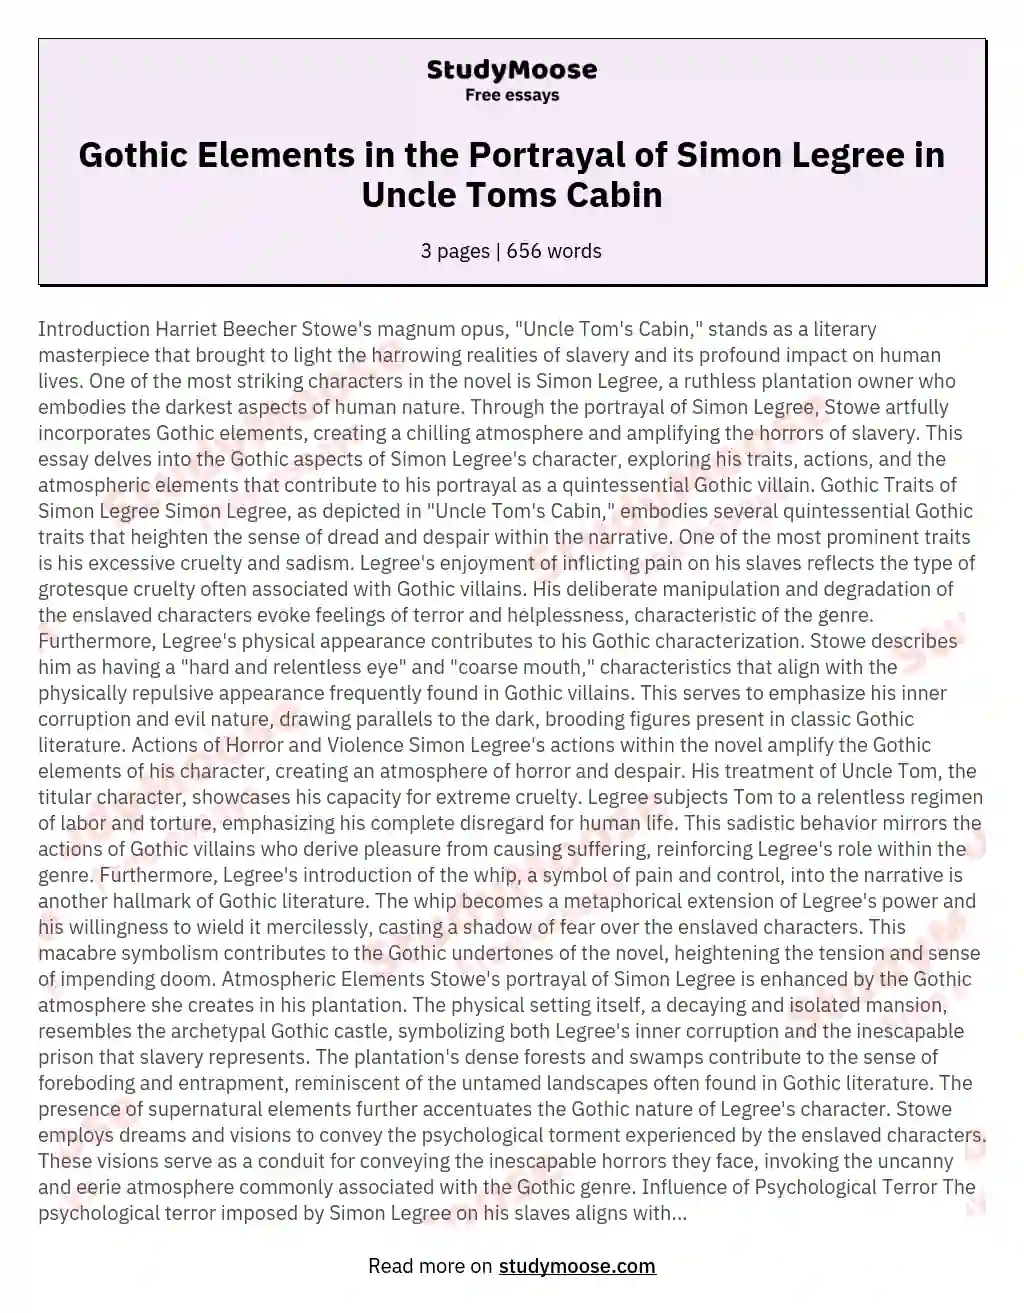 Gothic Elements in the Portrayal of Simon Legree in Uncle Toms Cabin essay